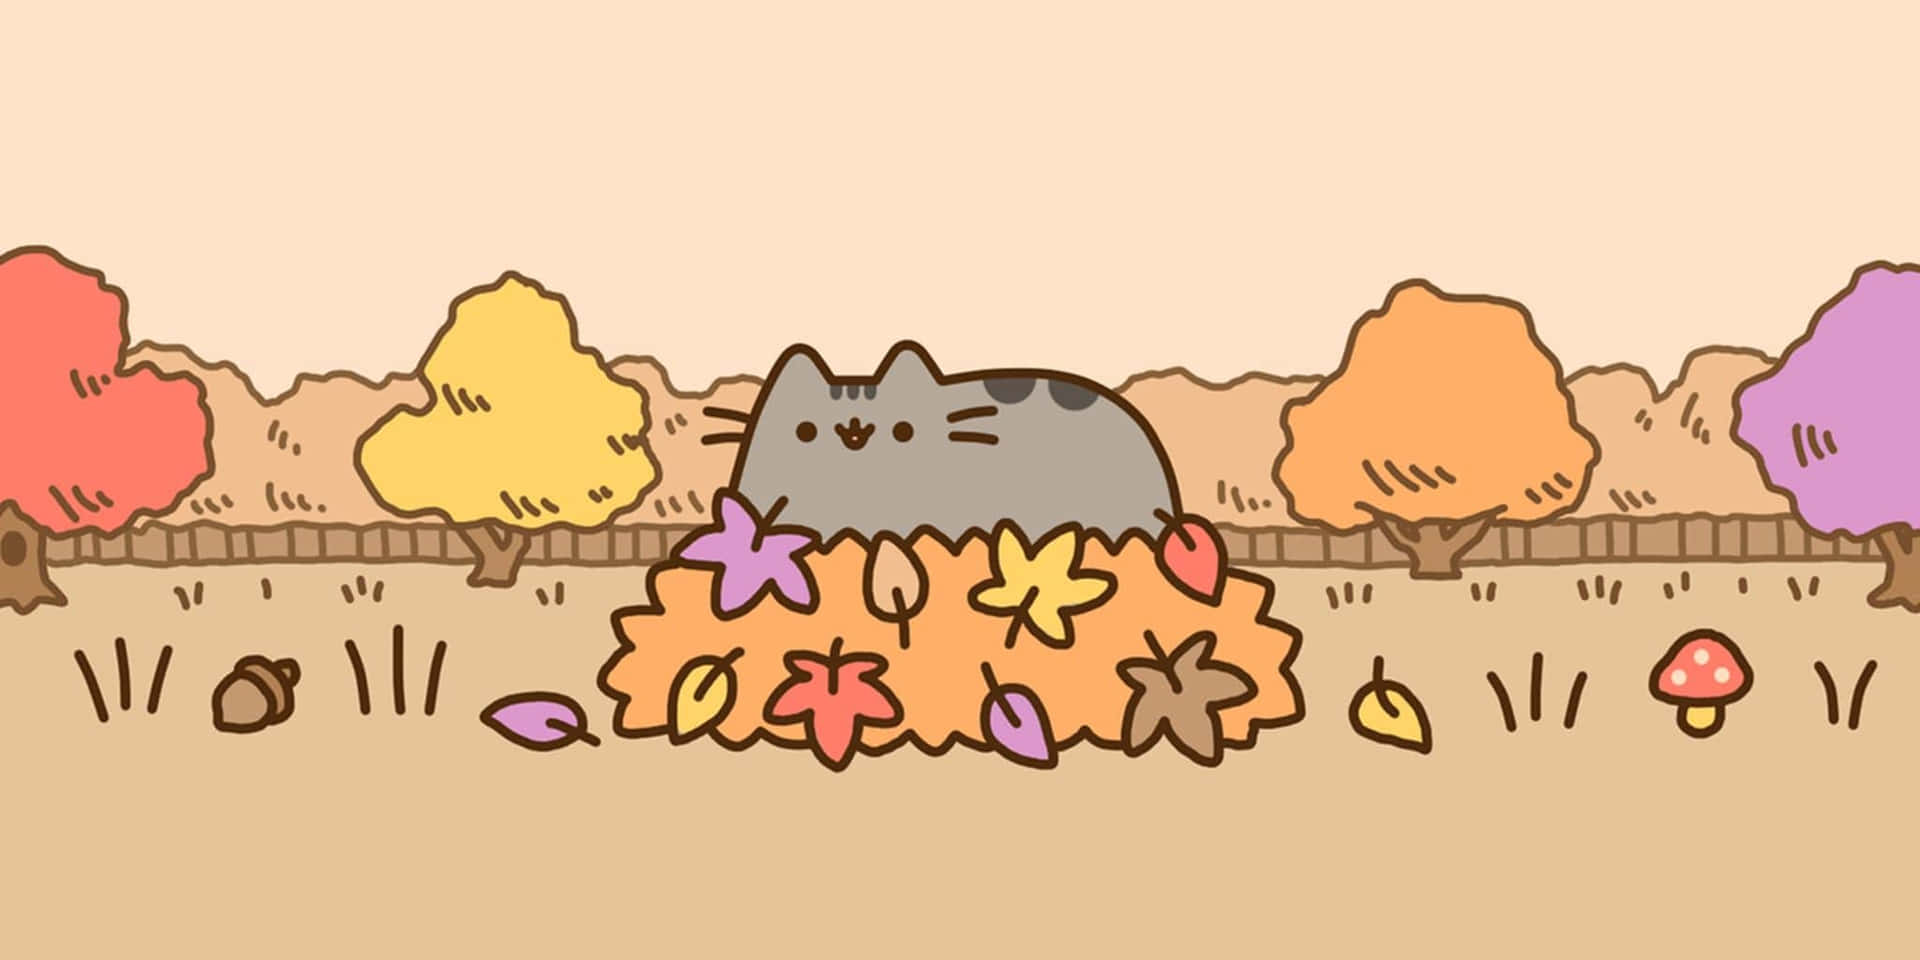 "Pusheen is ready to get to work!" Wallpaper